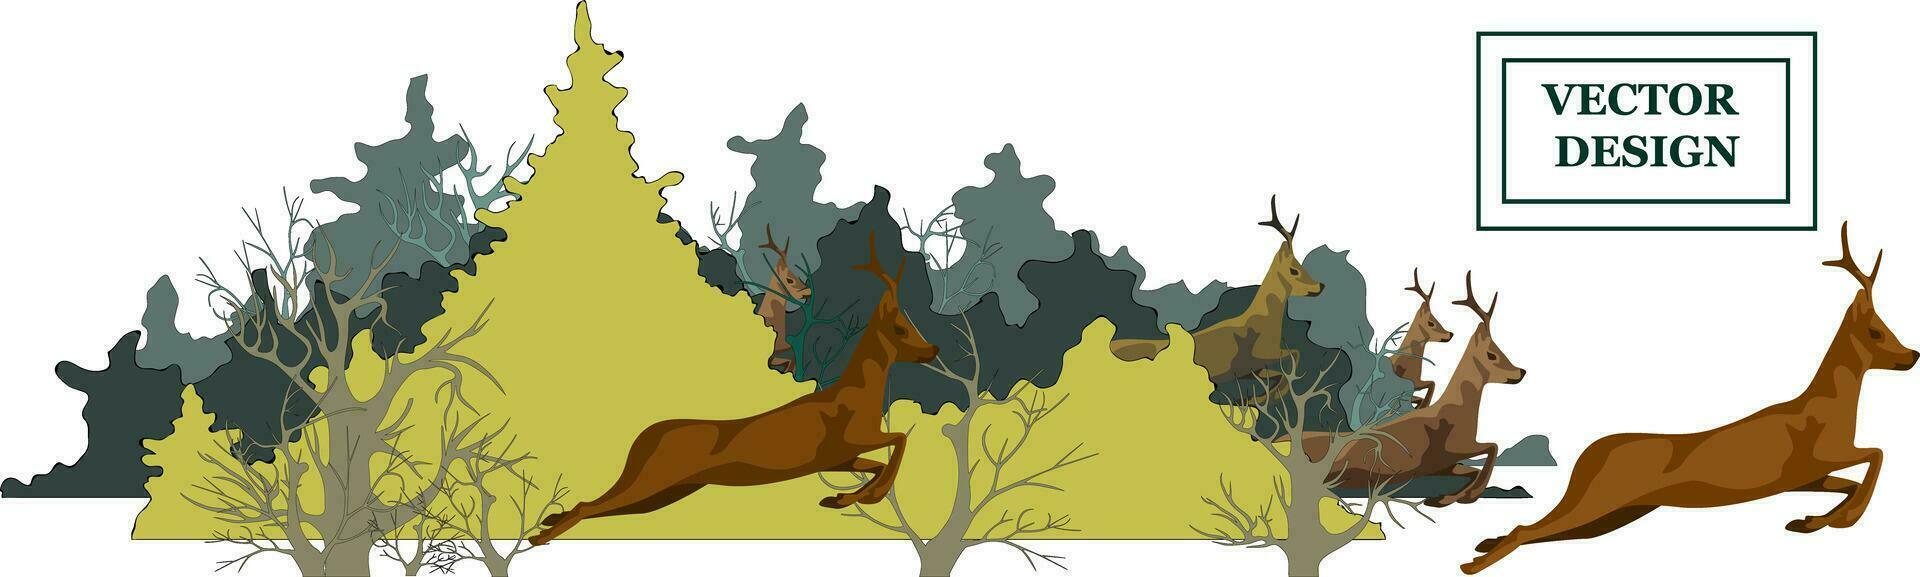 image of a forest and running animals from it. Concept of global deforestation and forest fire problems vector